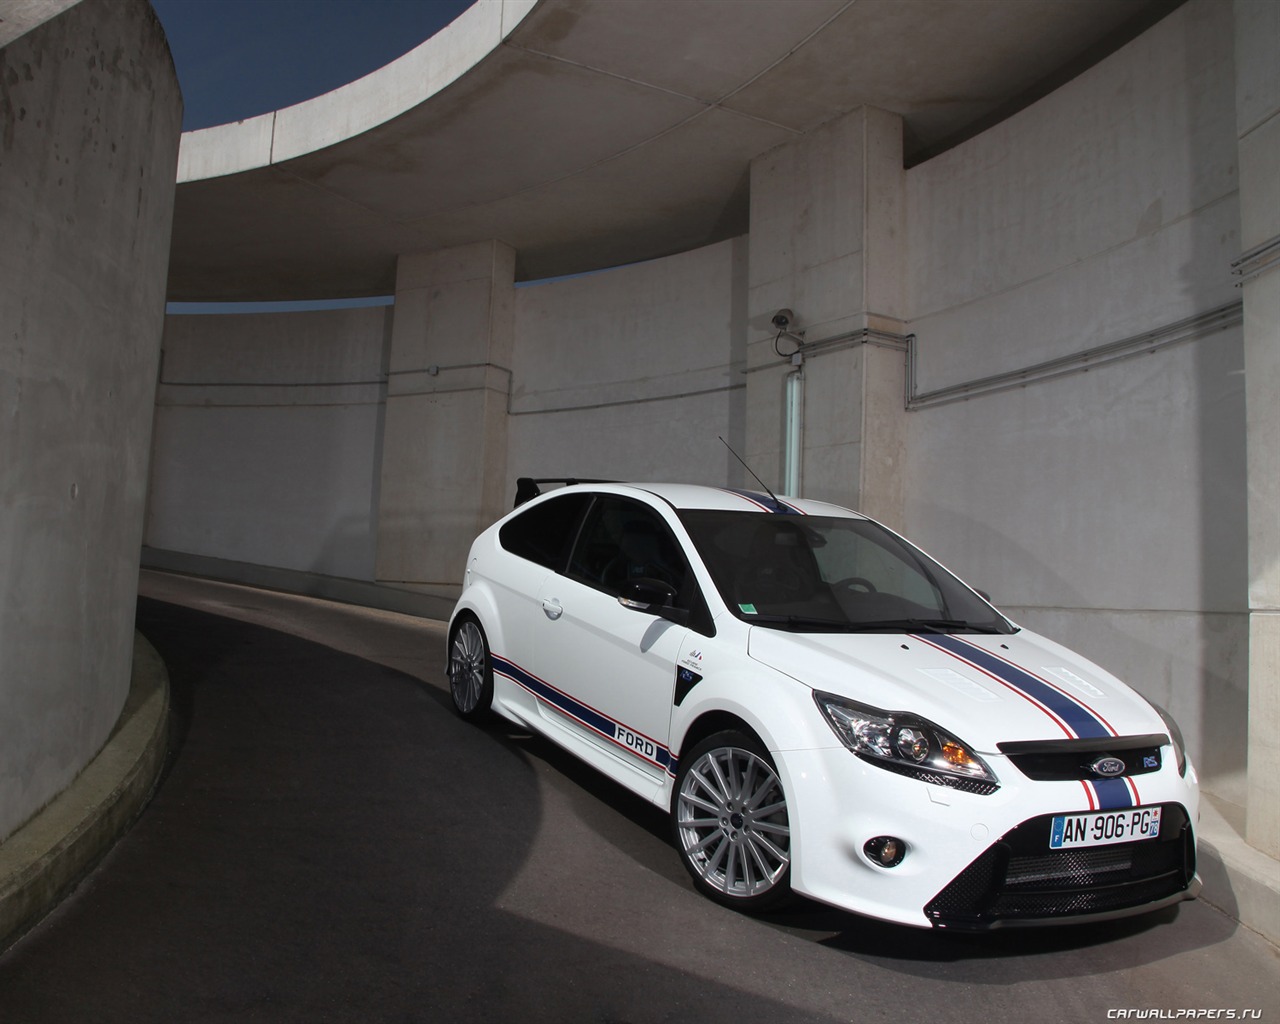 Ford Focus RS Le Mans Classic - 2010 福特7 - 1280x1024